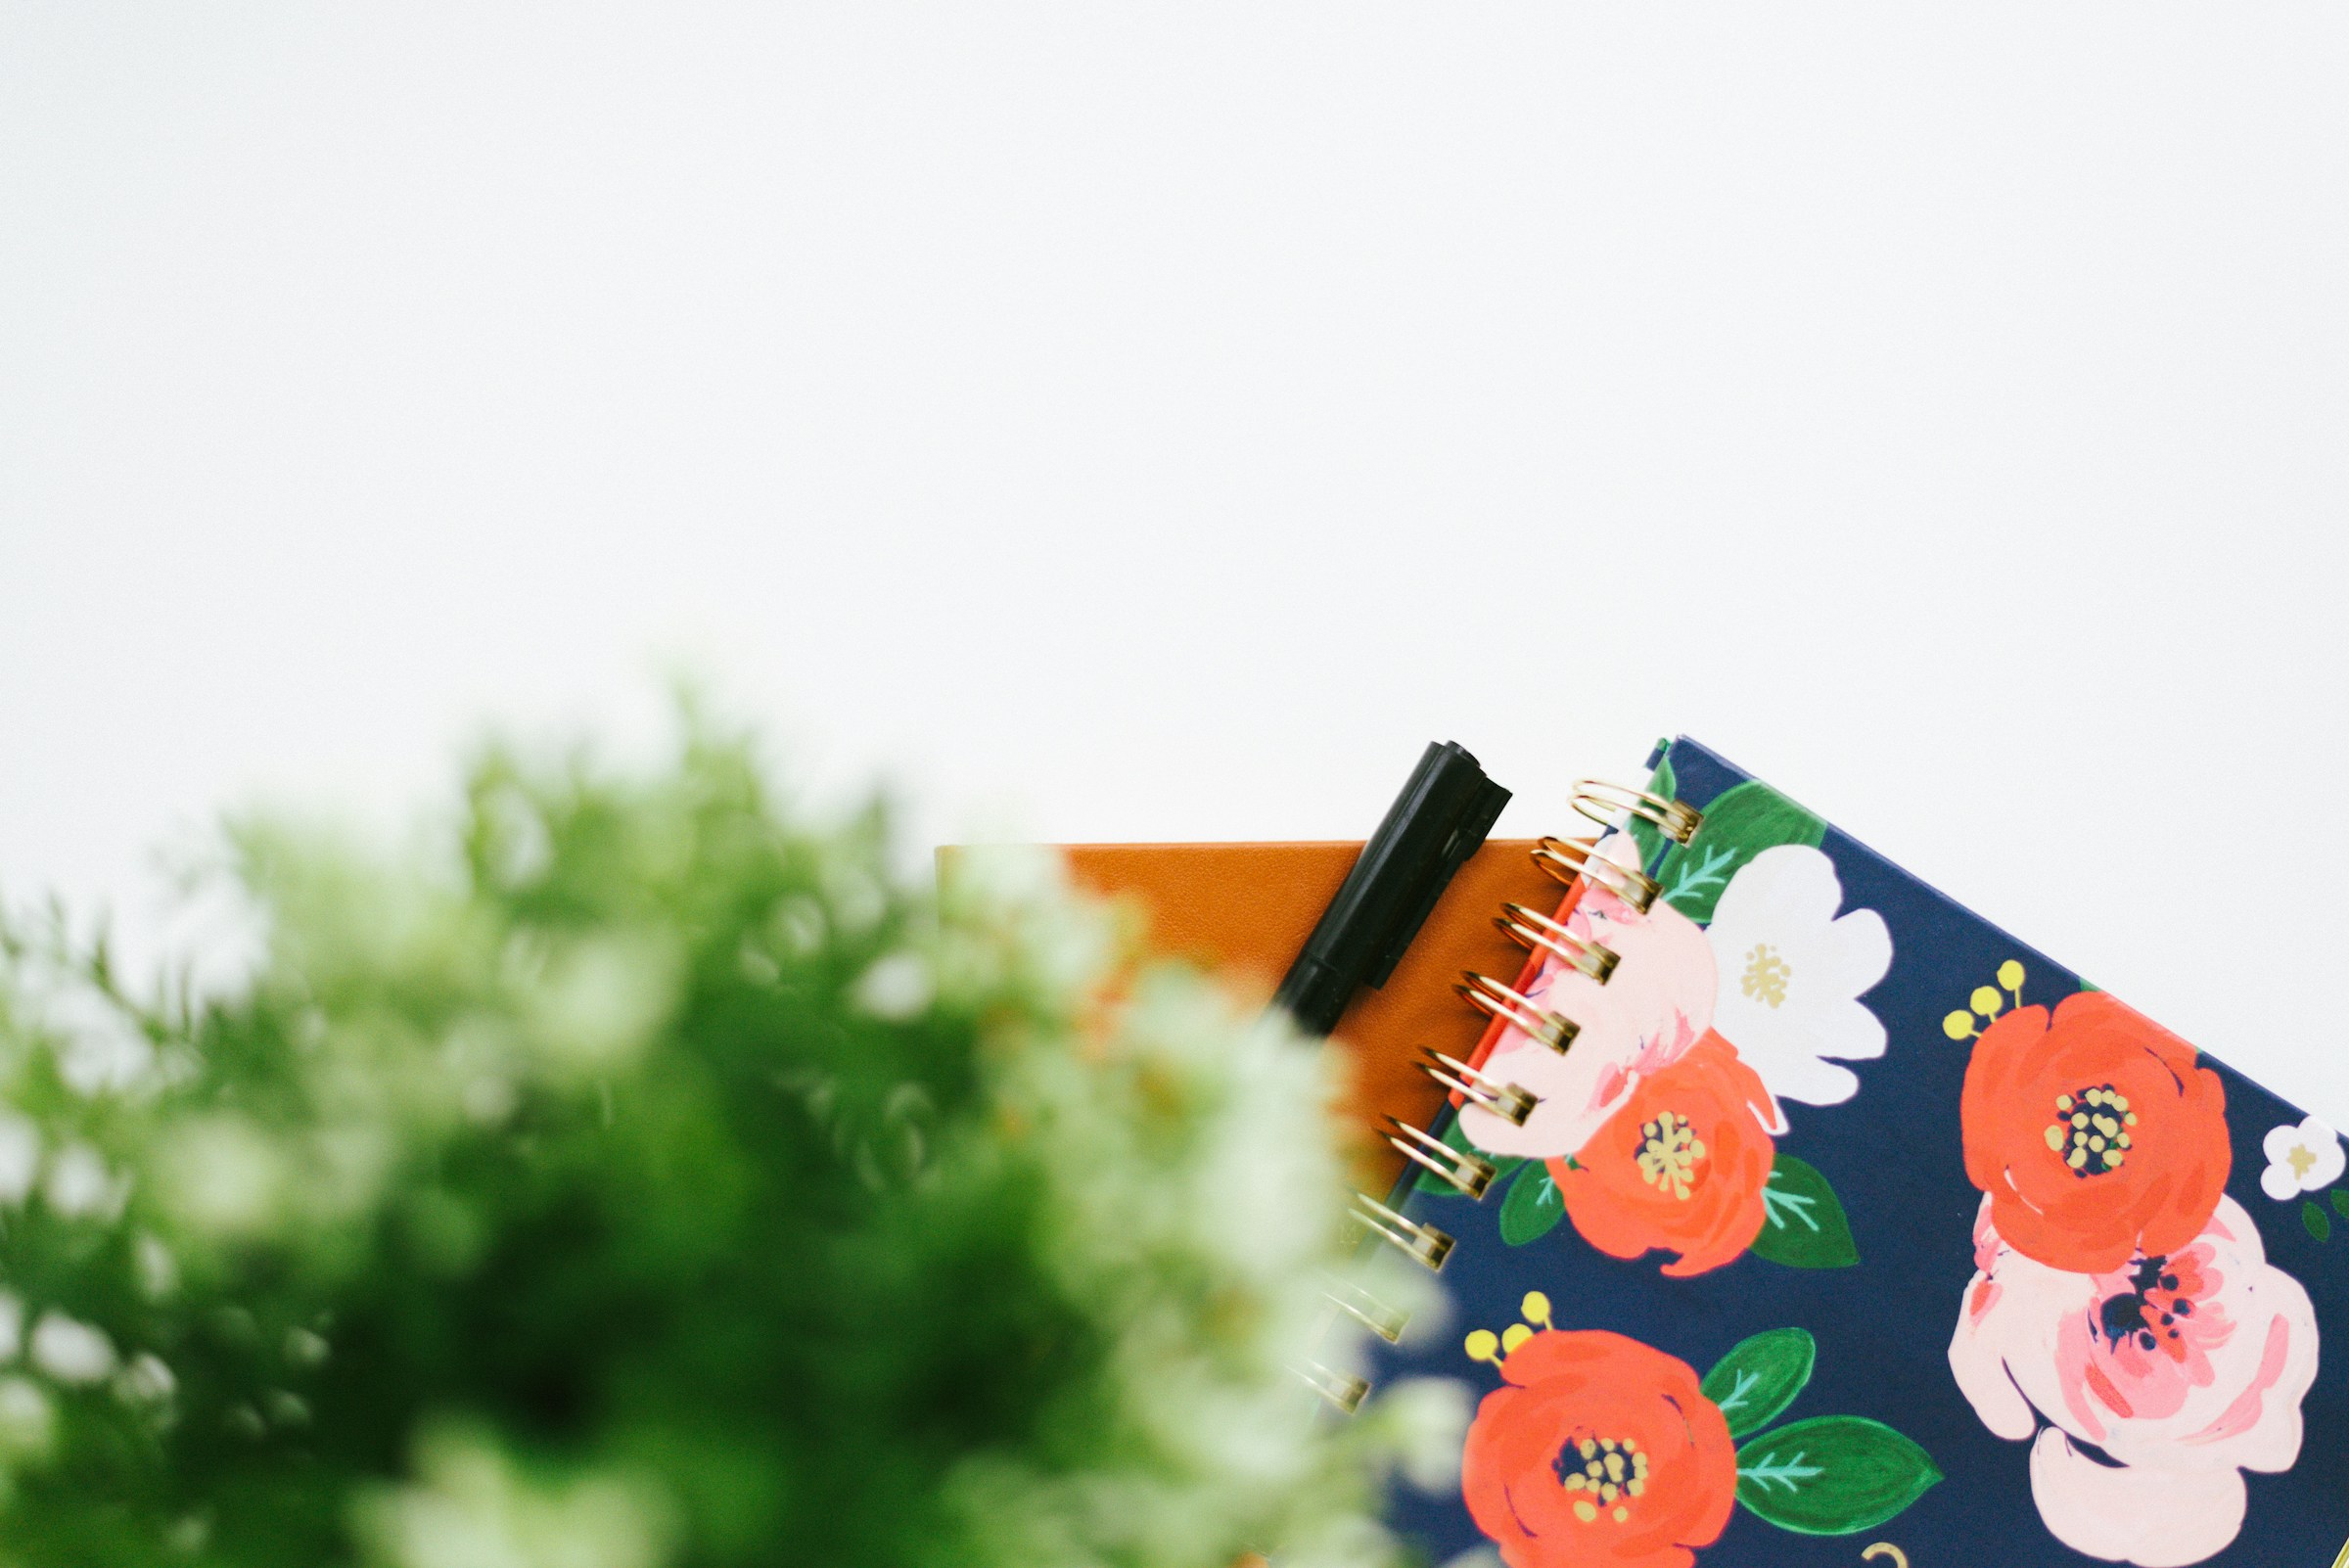 A diary with a floral cover | Source: Unsplash